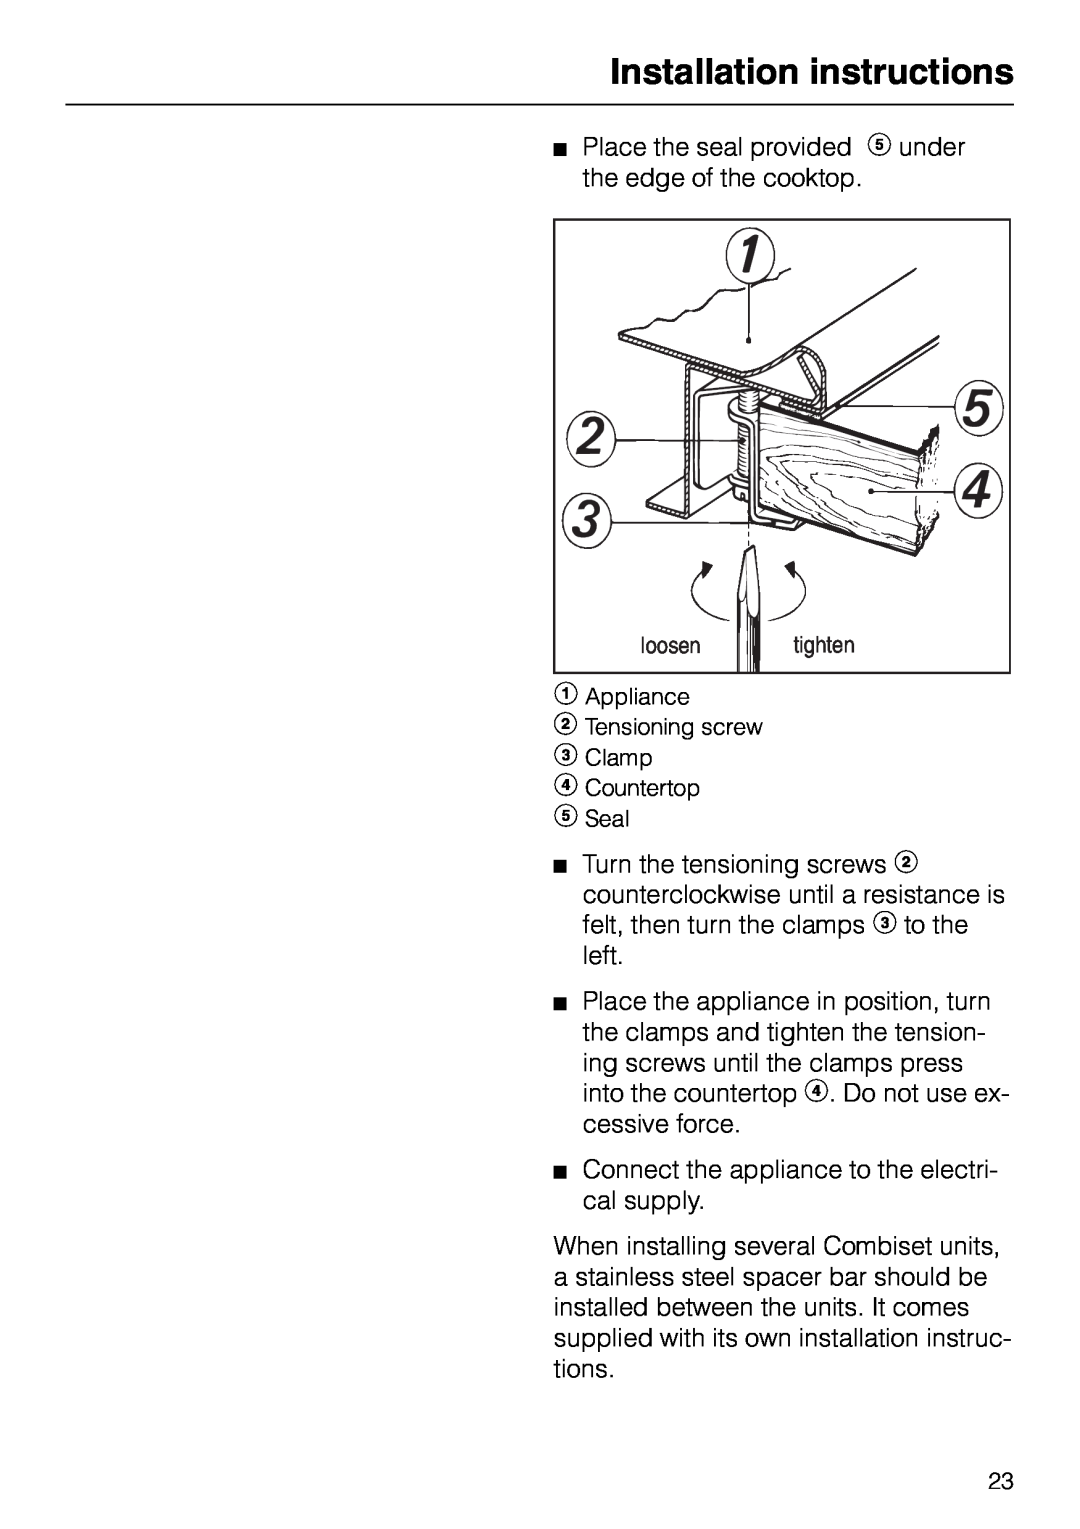 Miele KM 87-2, KM84-2 manual Installation instructions, Place the seal provided f under the edge of the cooktop 